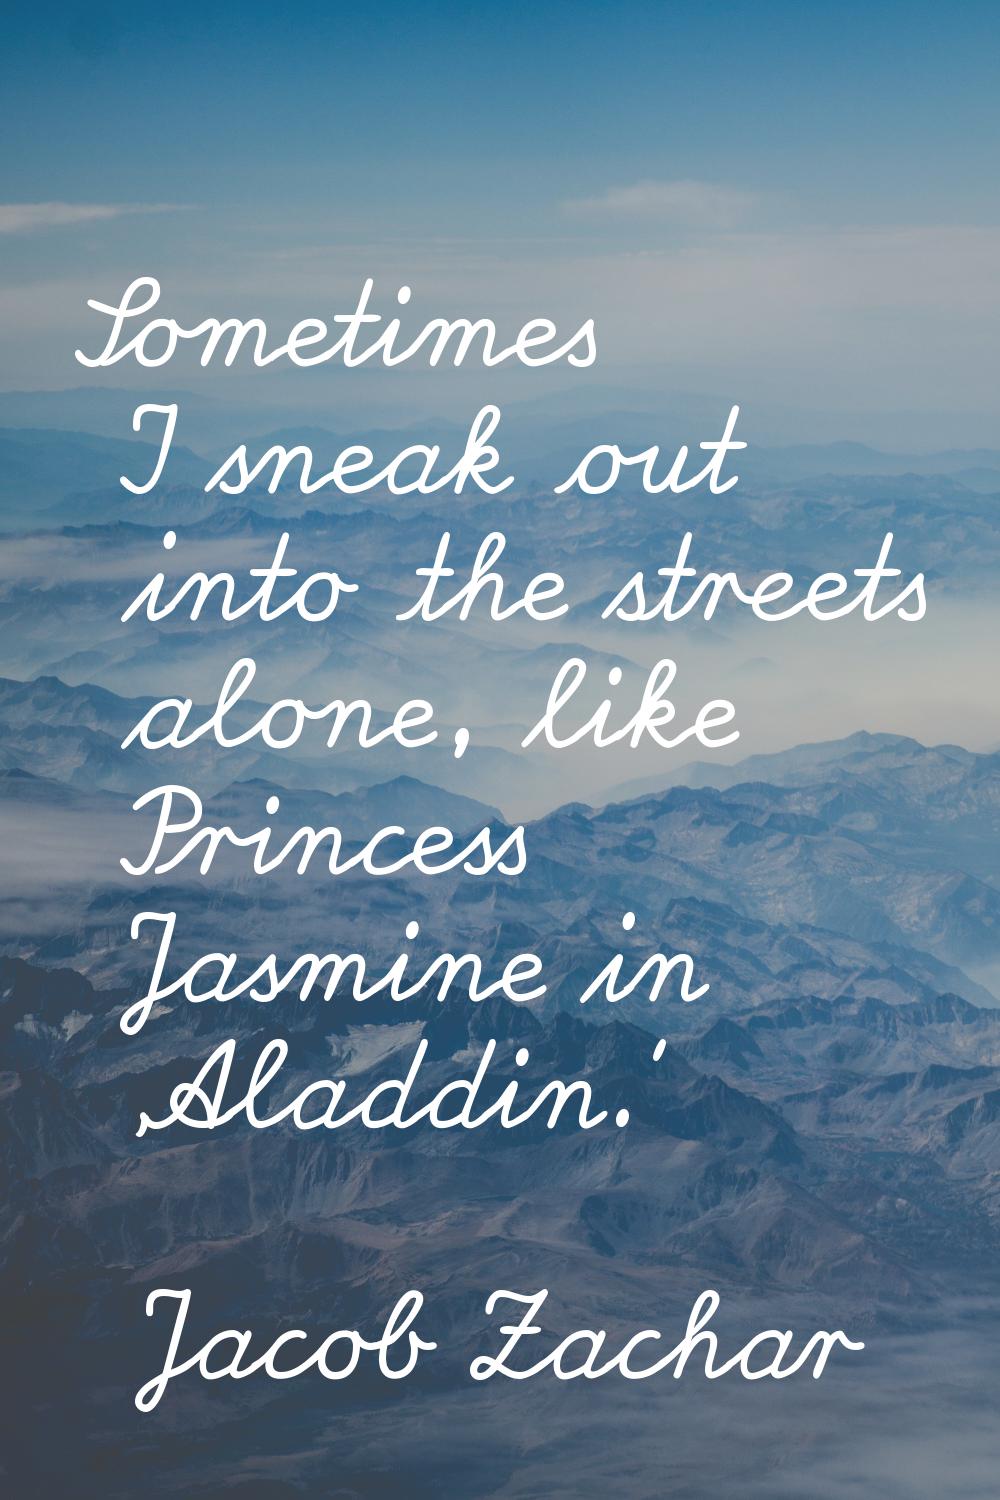 Sometimes I sneak out into the streets alone, like Princess Jasmine in 'Aladdin.'